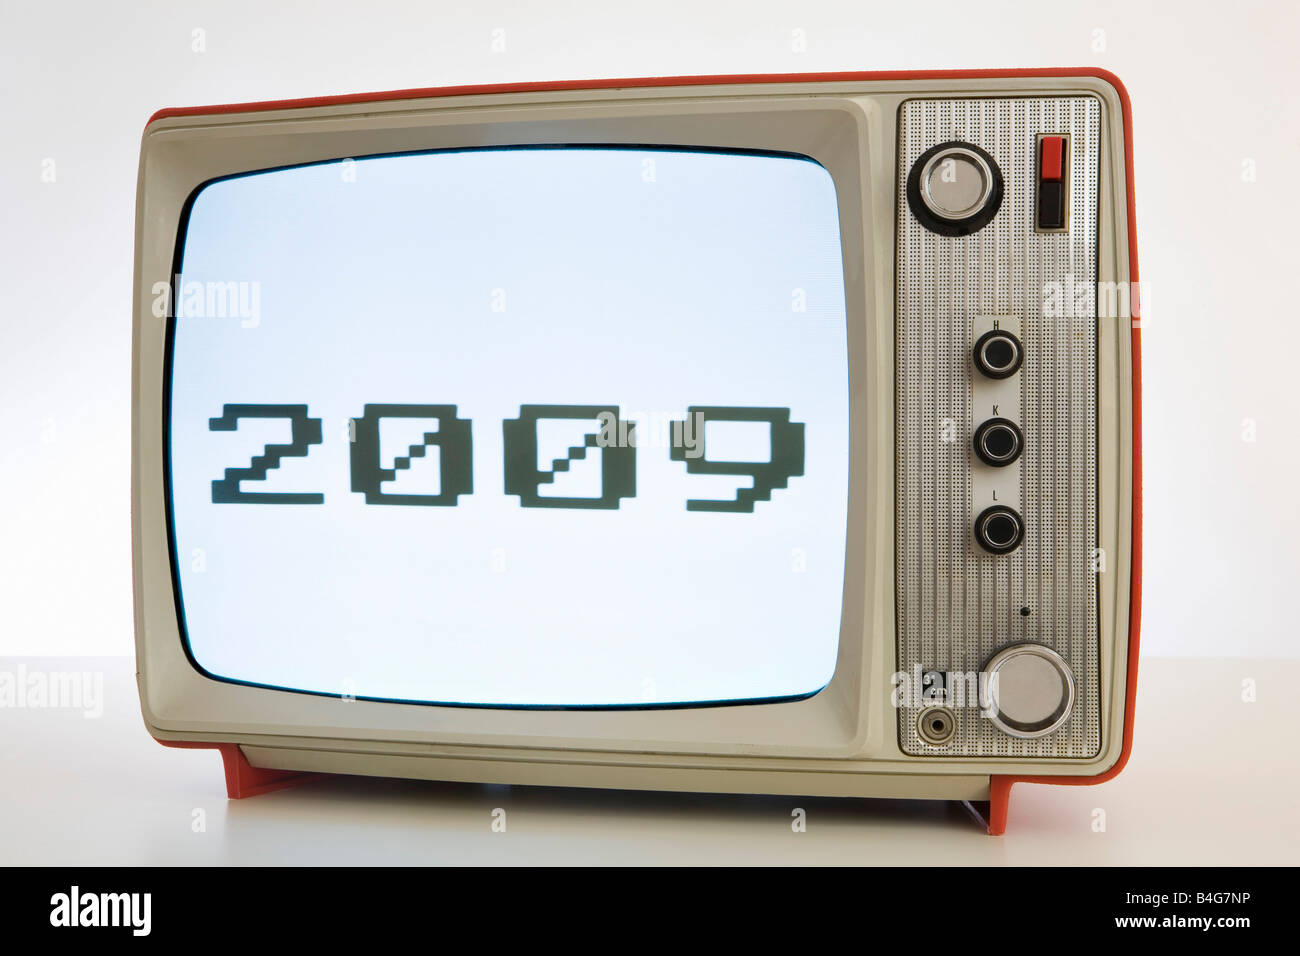 A television with a black and white image of '2009' Stock Photo